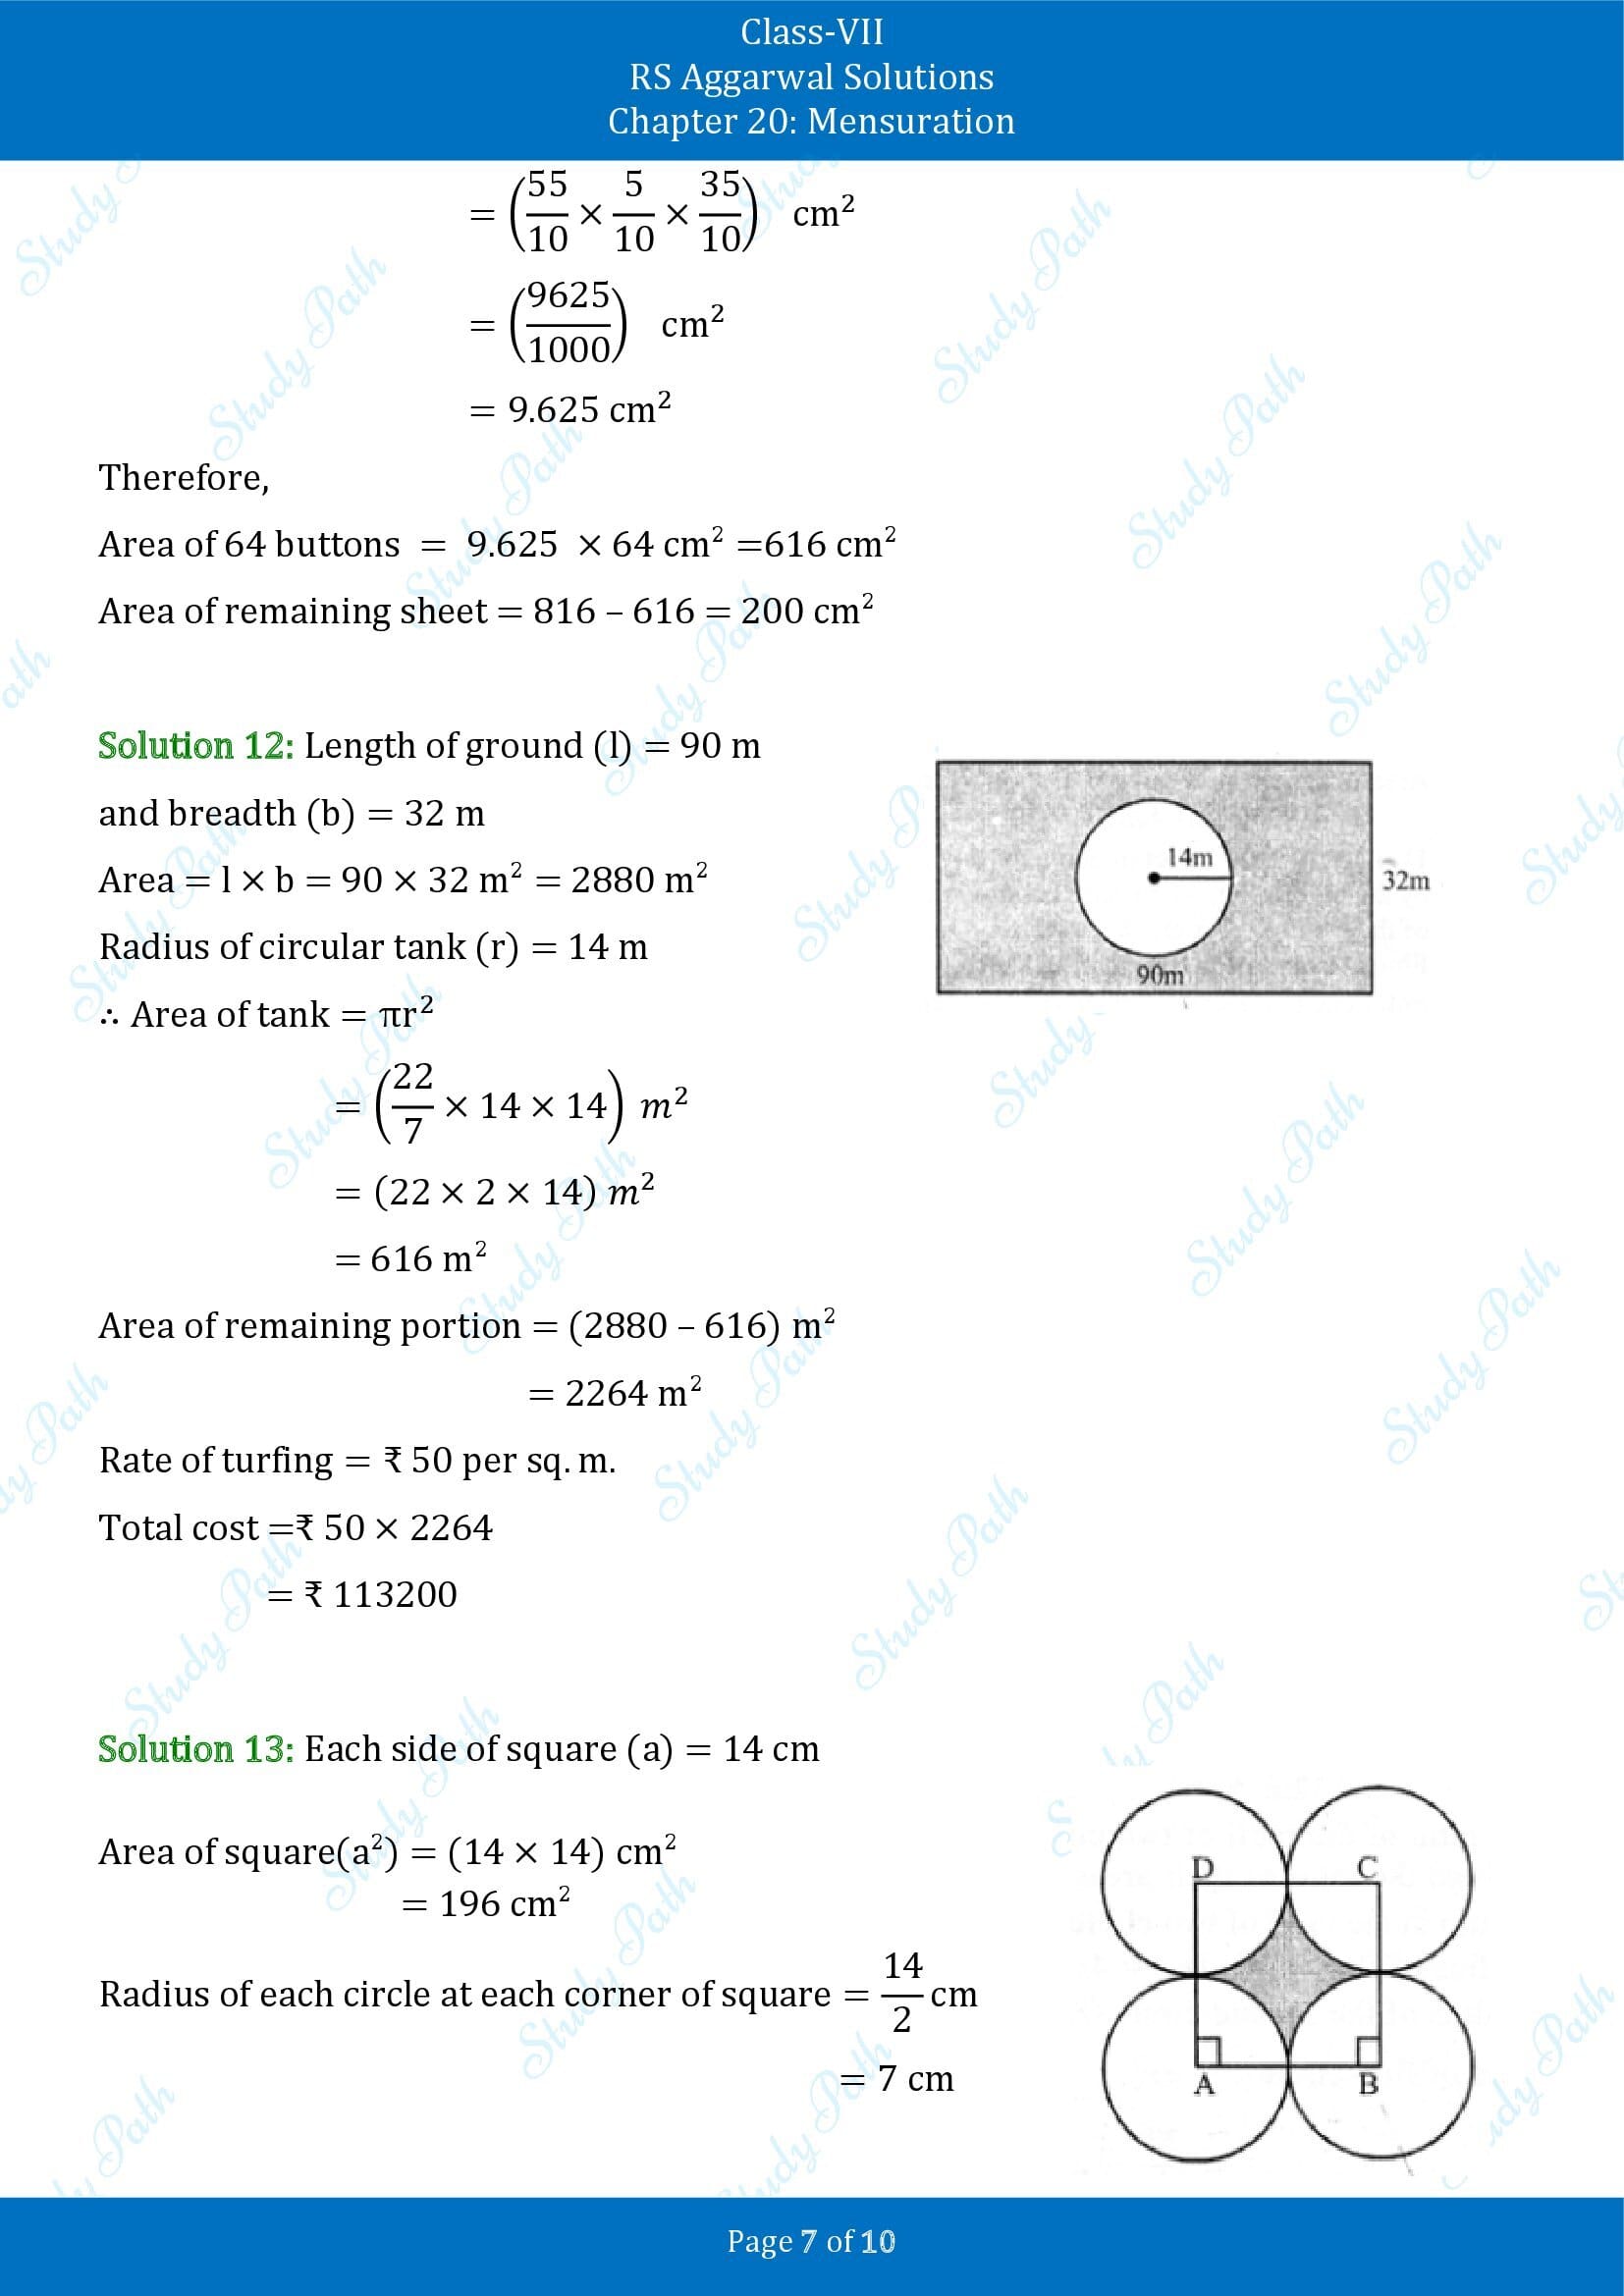 RS Aggarwal Solutions Class 7 Chapter 20 Mensuration Exercise 20F 00007